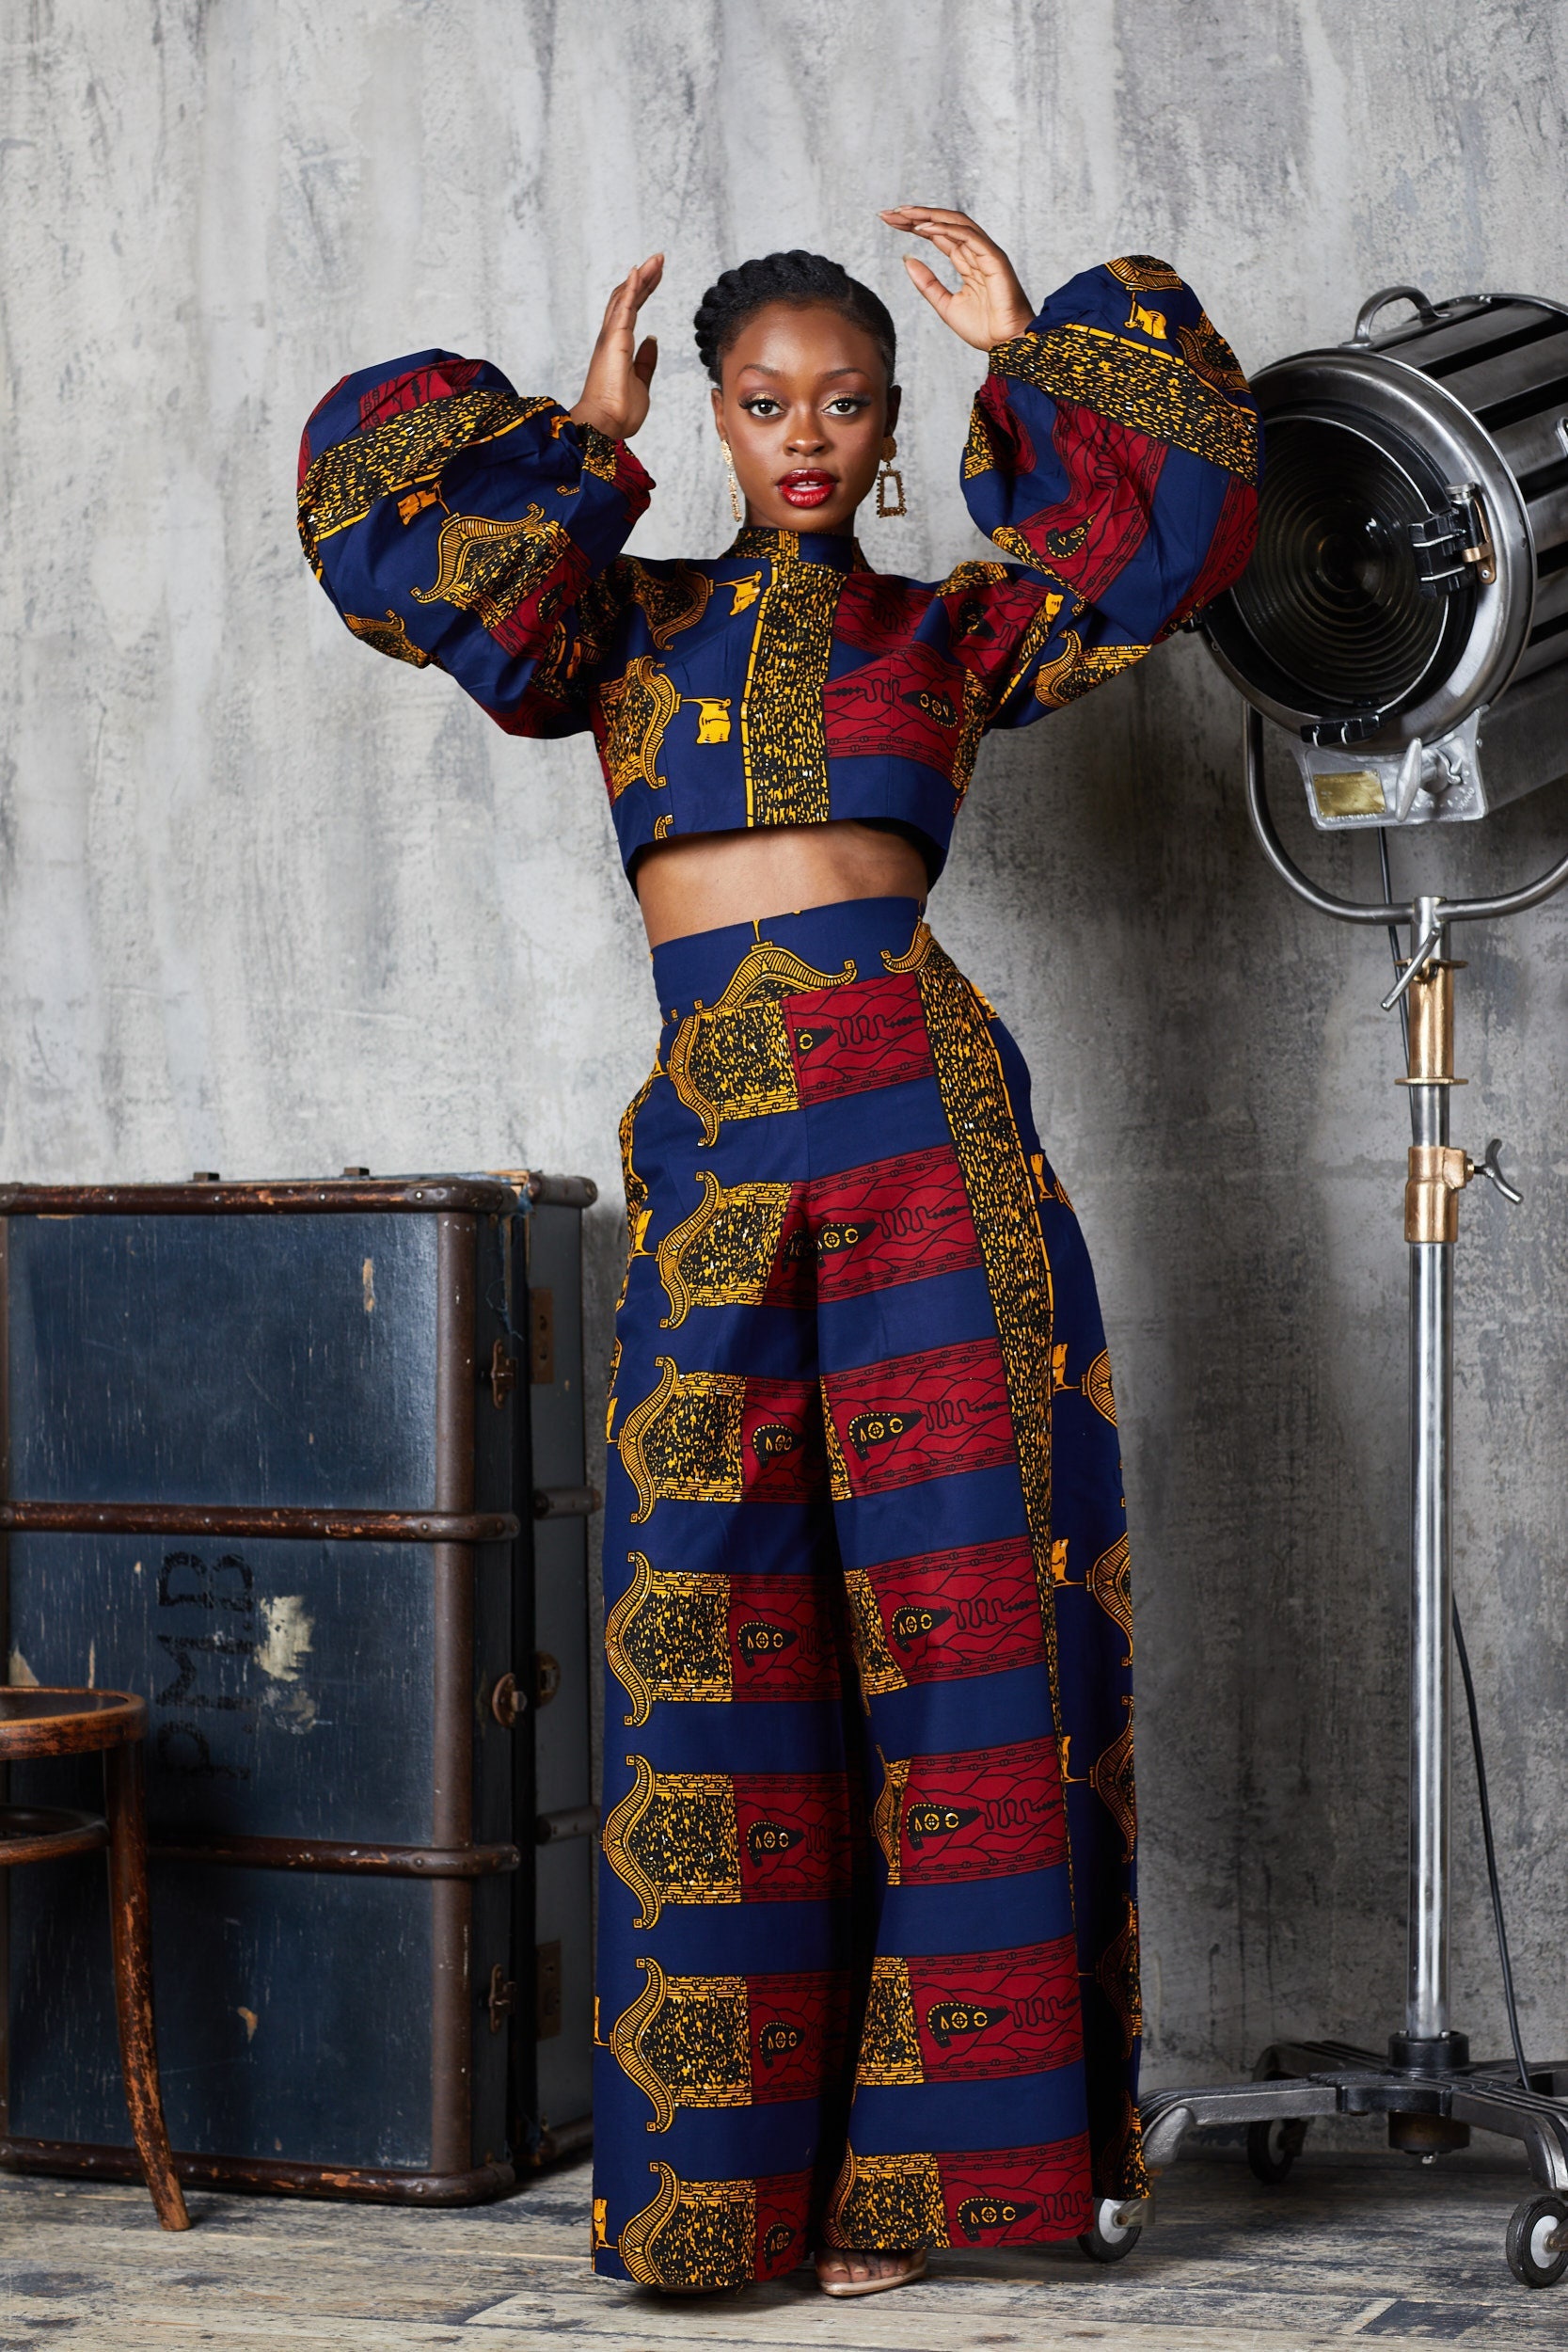 Ankara Wide Leg Pants and Crop Top, African Print 2 Piece Casual Wear,  Comfortable Clothing for Women, Palazzo Pants And Top